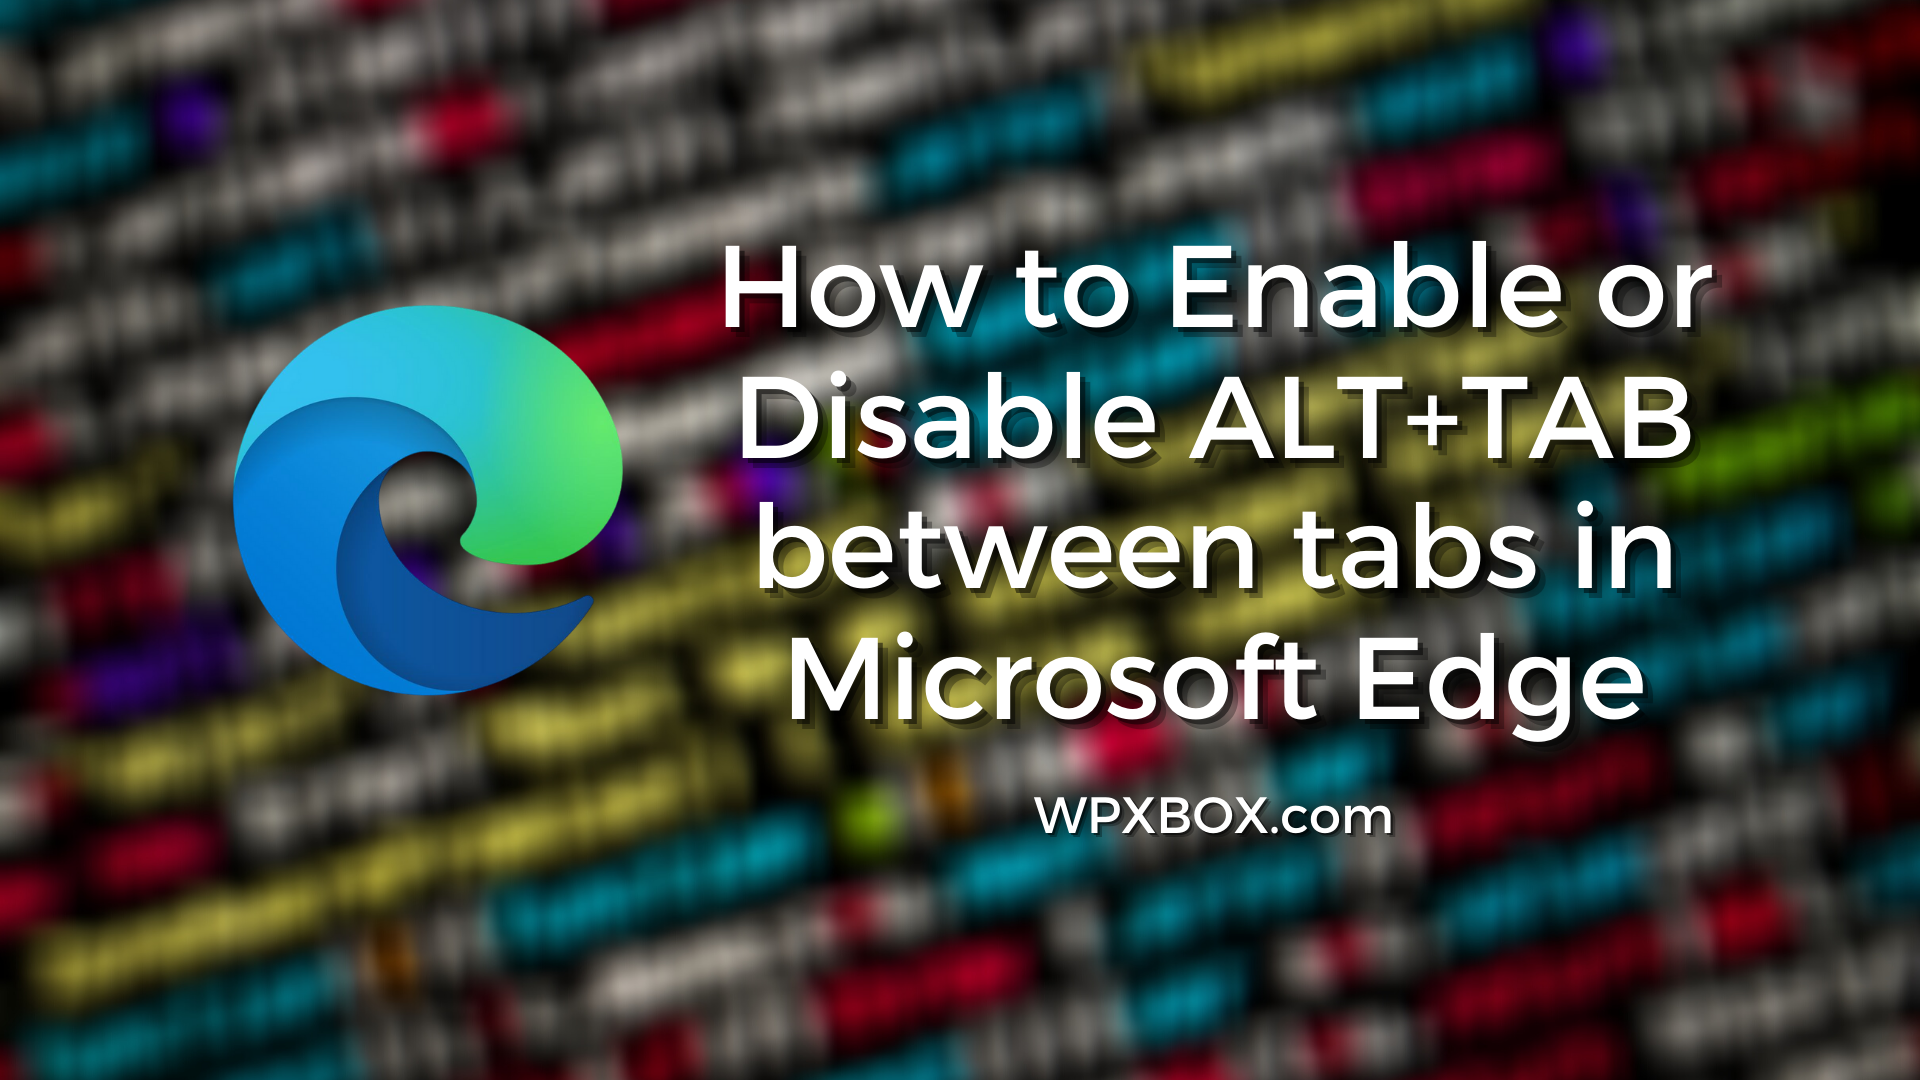 Enable or Disable ALT+TAB between tabs in Microsoft Edge